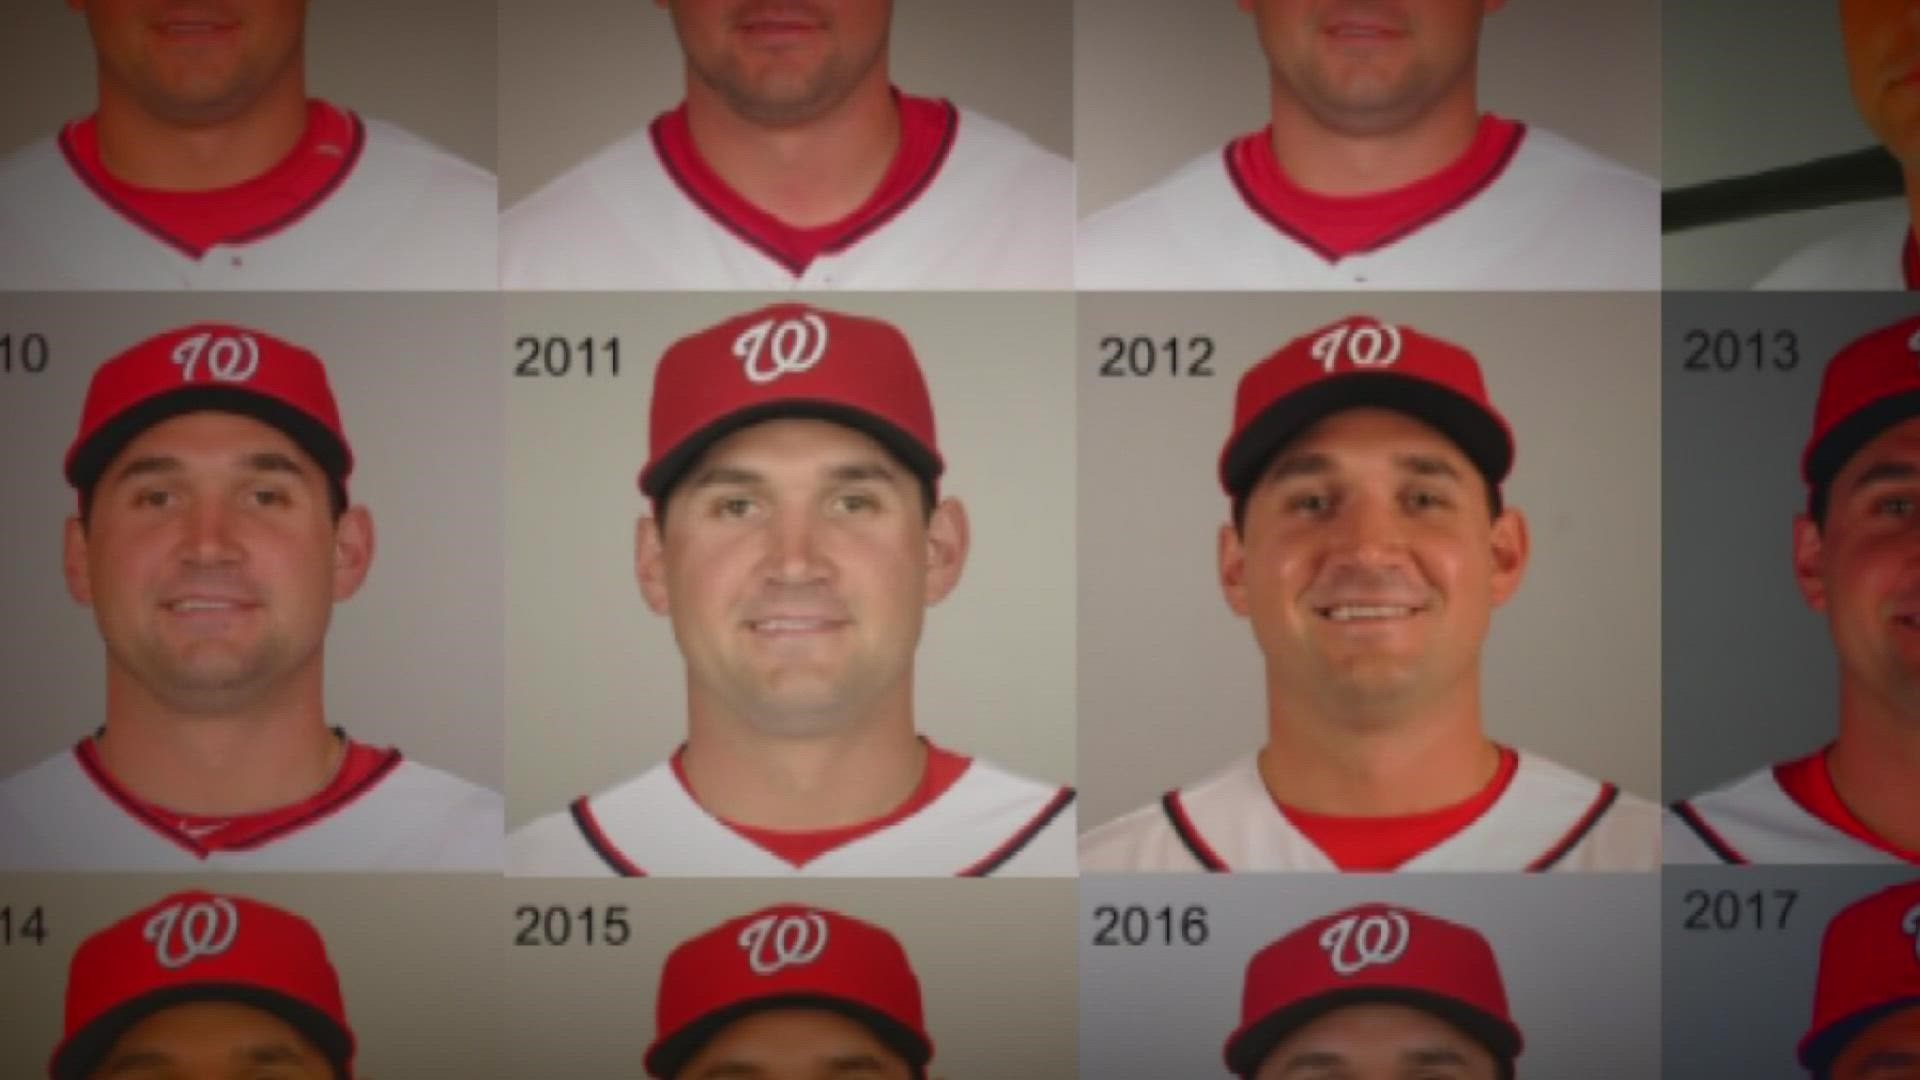 Ryan Zimmerman was the first-ever Major League Baseball draft pick for the Washington Nationals franchise back in 2005 after their move from Montreal.